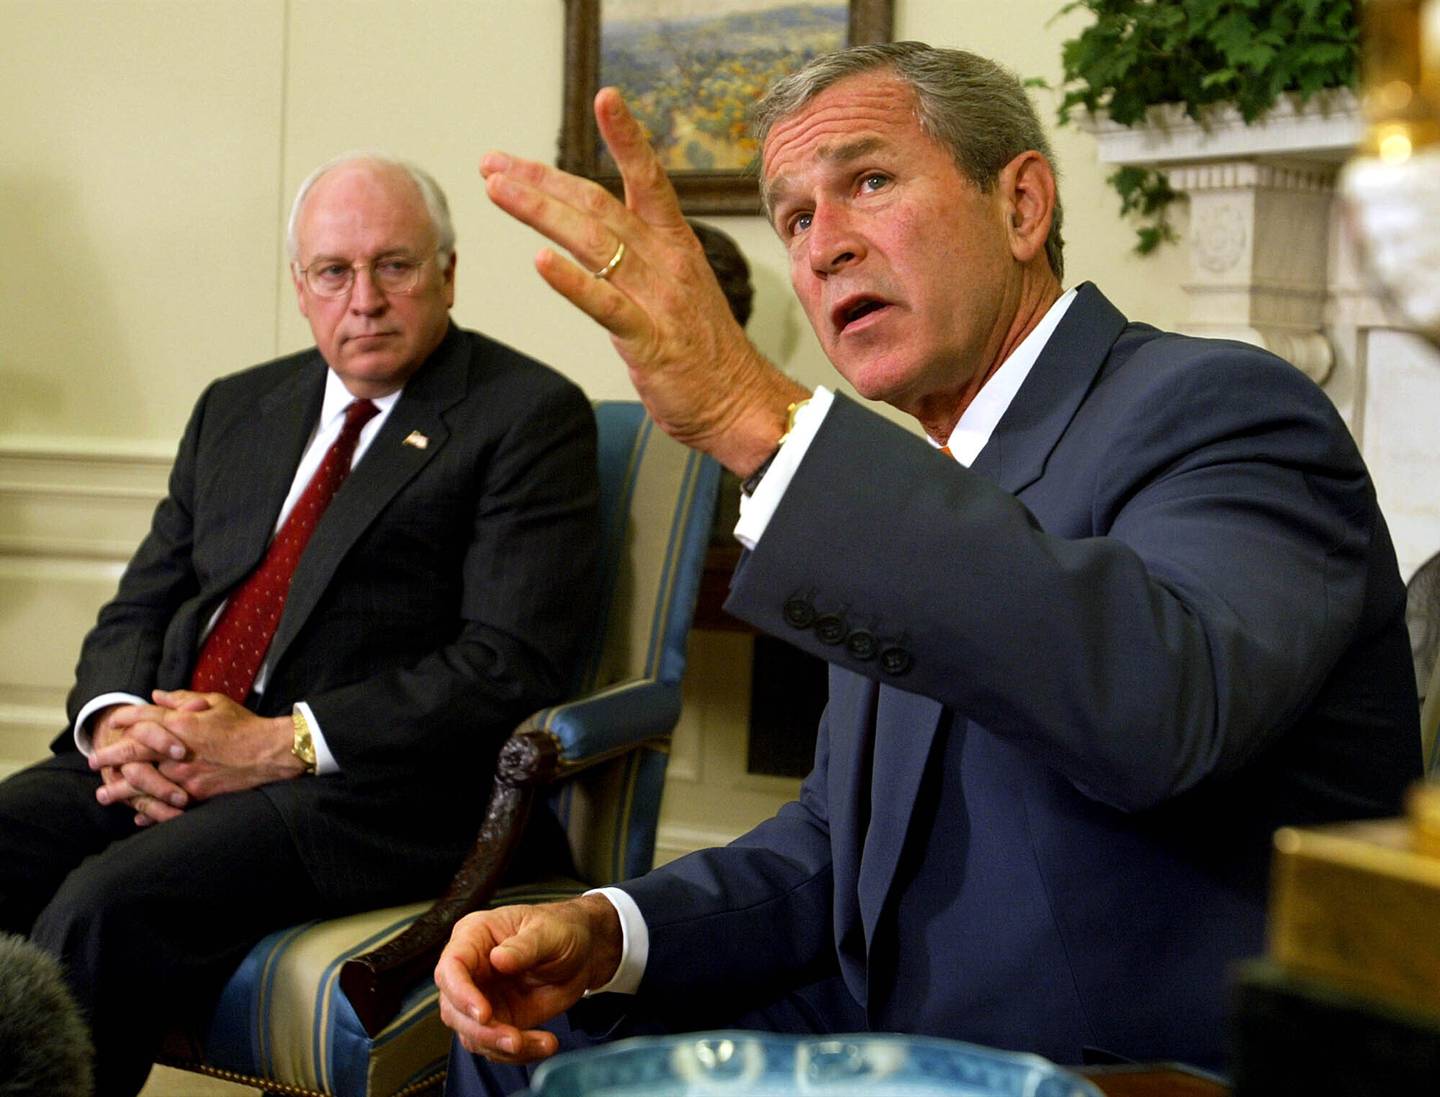 FILE - President George W. Bush, right, with Vice President Dick Cheney at his side, speaks during a meeting with congressional leaders in the White House Oval Office on Sept. 18, 2002. A new CNN Films documentary explores the role of the U.S. vice presidency, which in modern times has emerged into a more powerful position. Still, the film notes that  a veep’s duties are all up to the president. (AP Photo/Doug Mills, File)